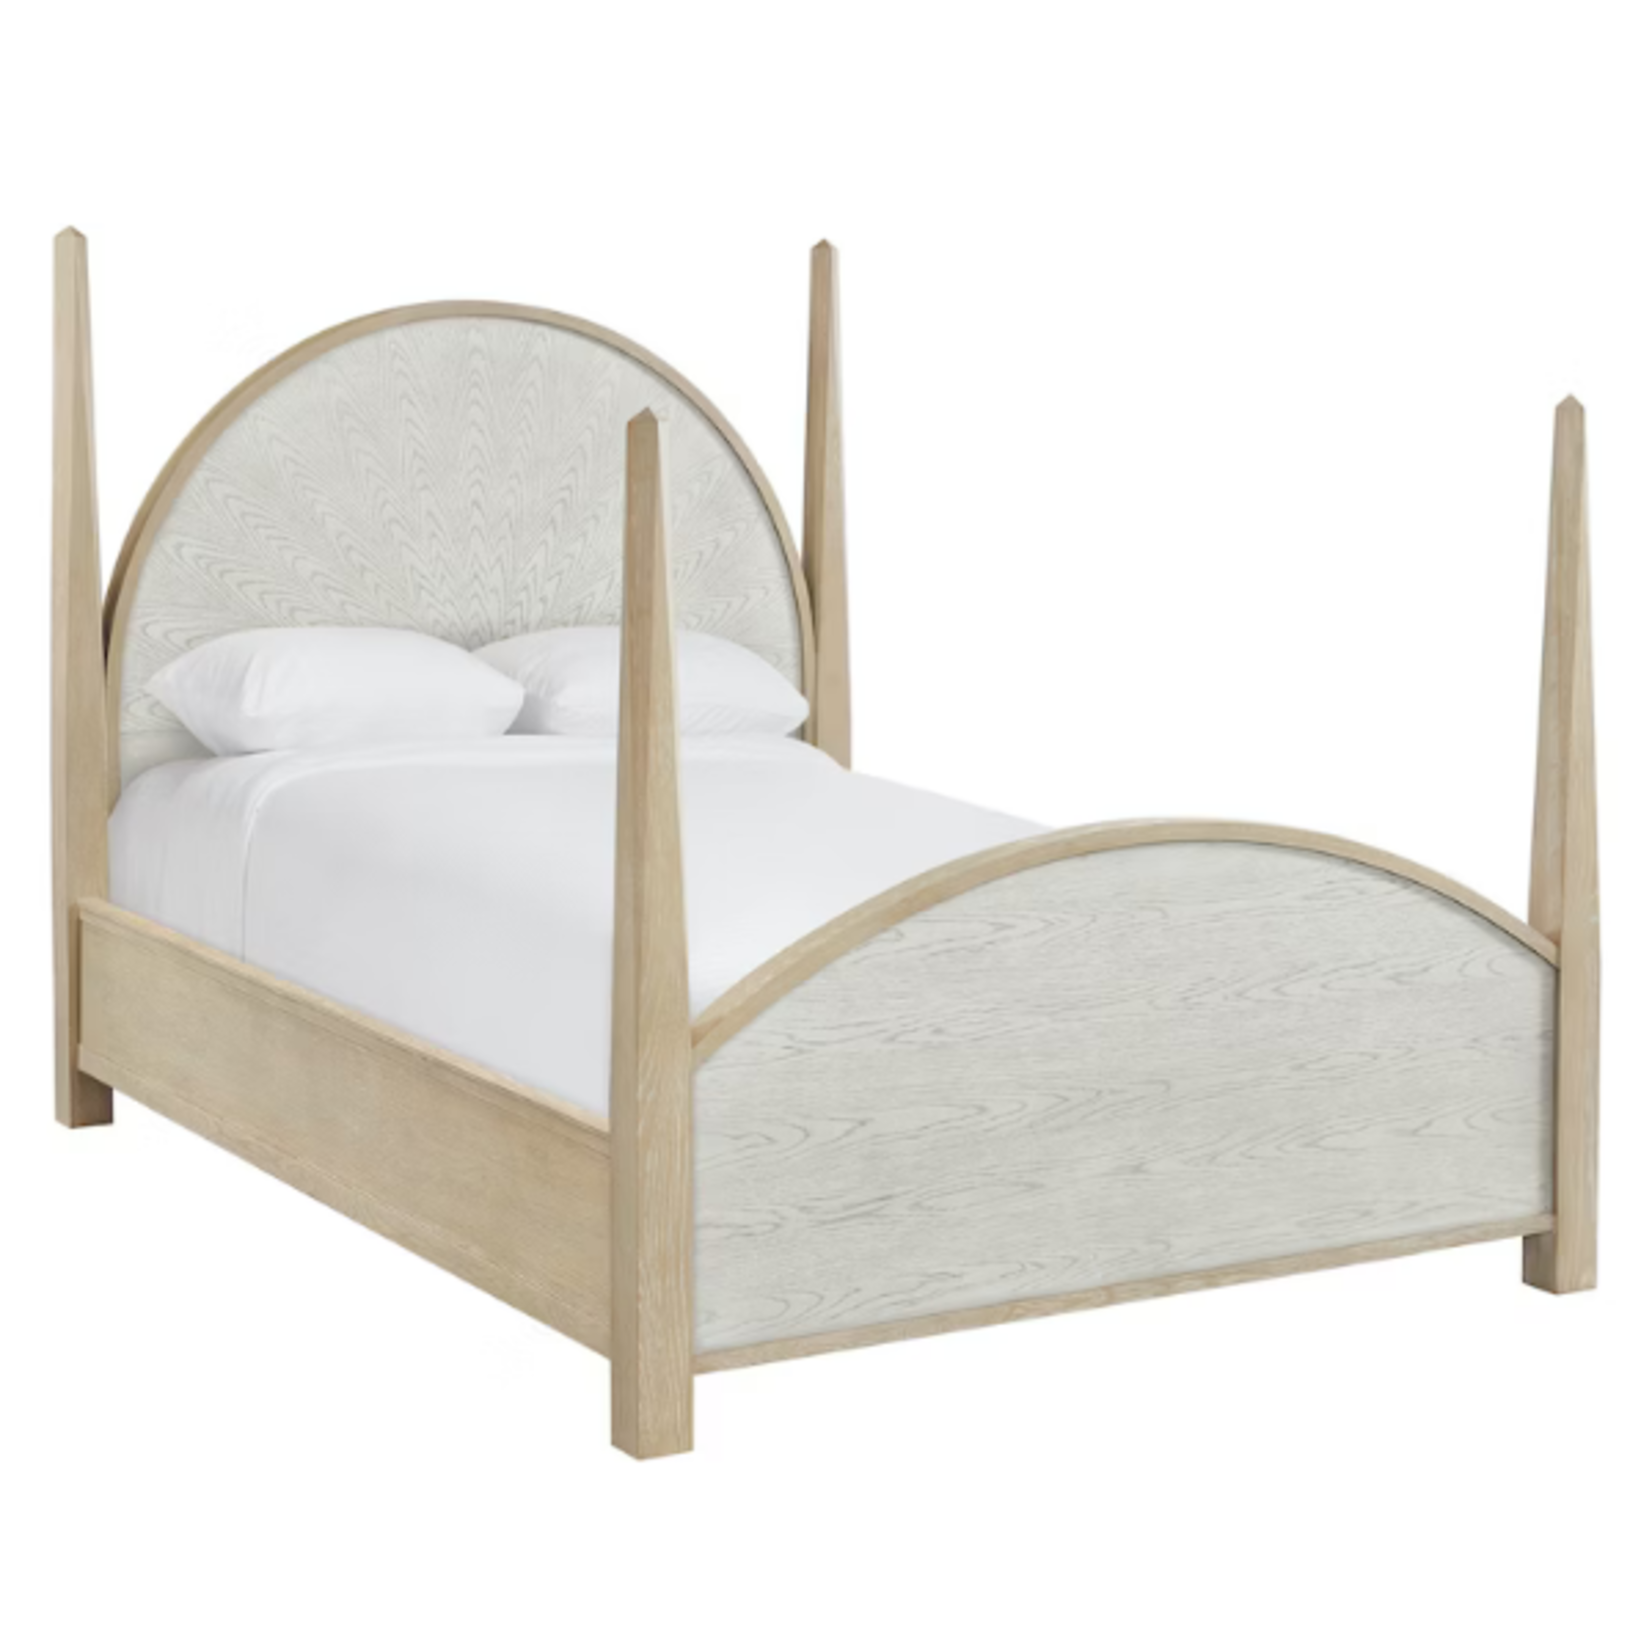 WHITTIER WOOD CATALINA QUEEN POSTER BED